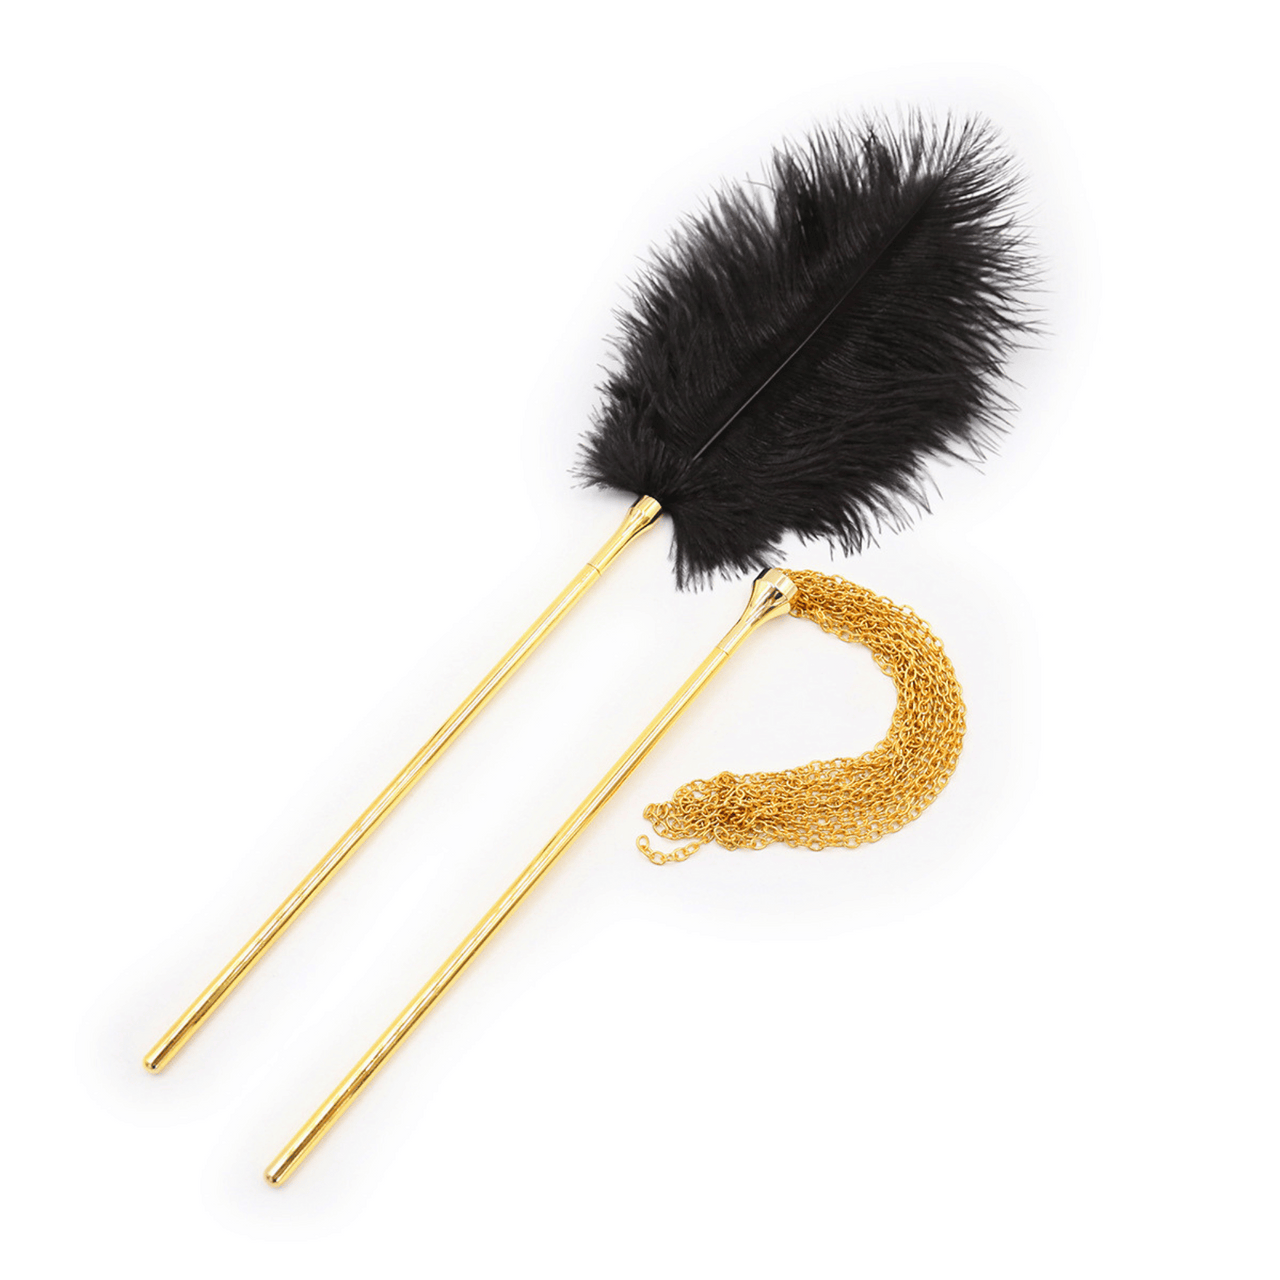 Luxury Pleasure Pain Feather Tickler with Interchangeable Gold Handle and Flogger Attachment Elegant Metal Gold Tassels for Enhanced Sensory Play